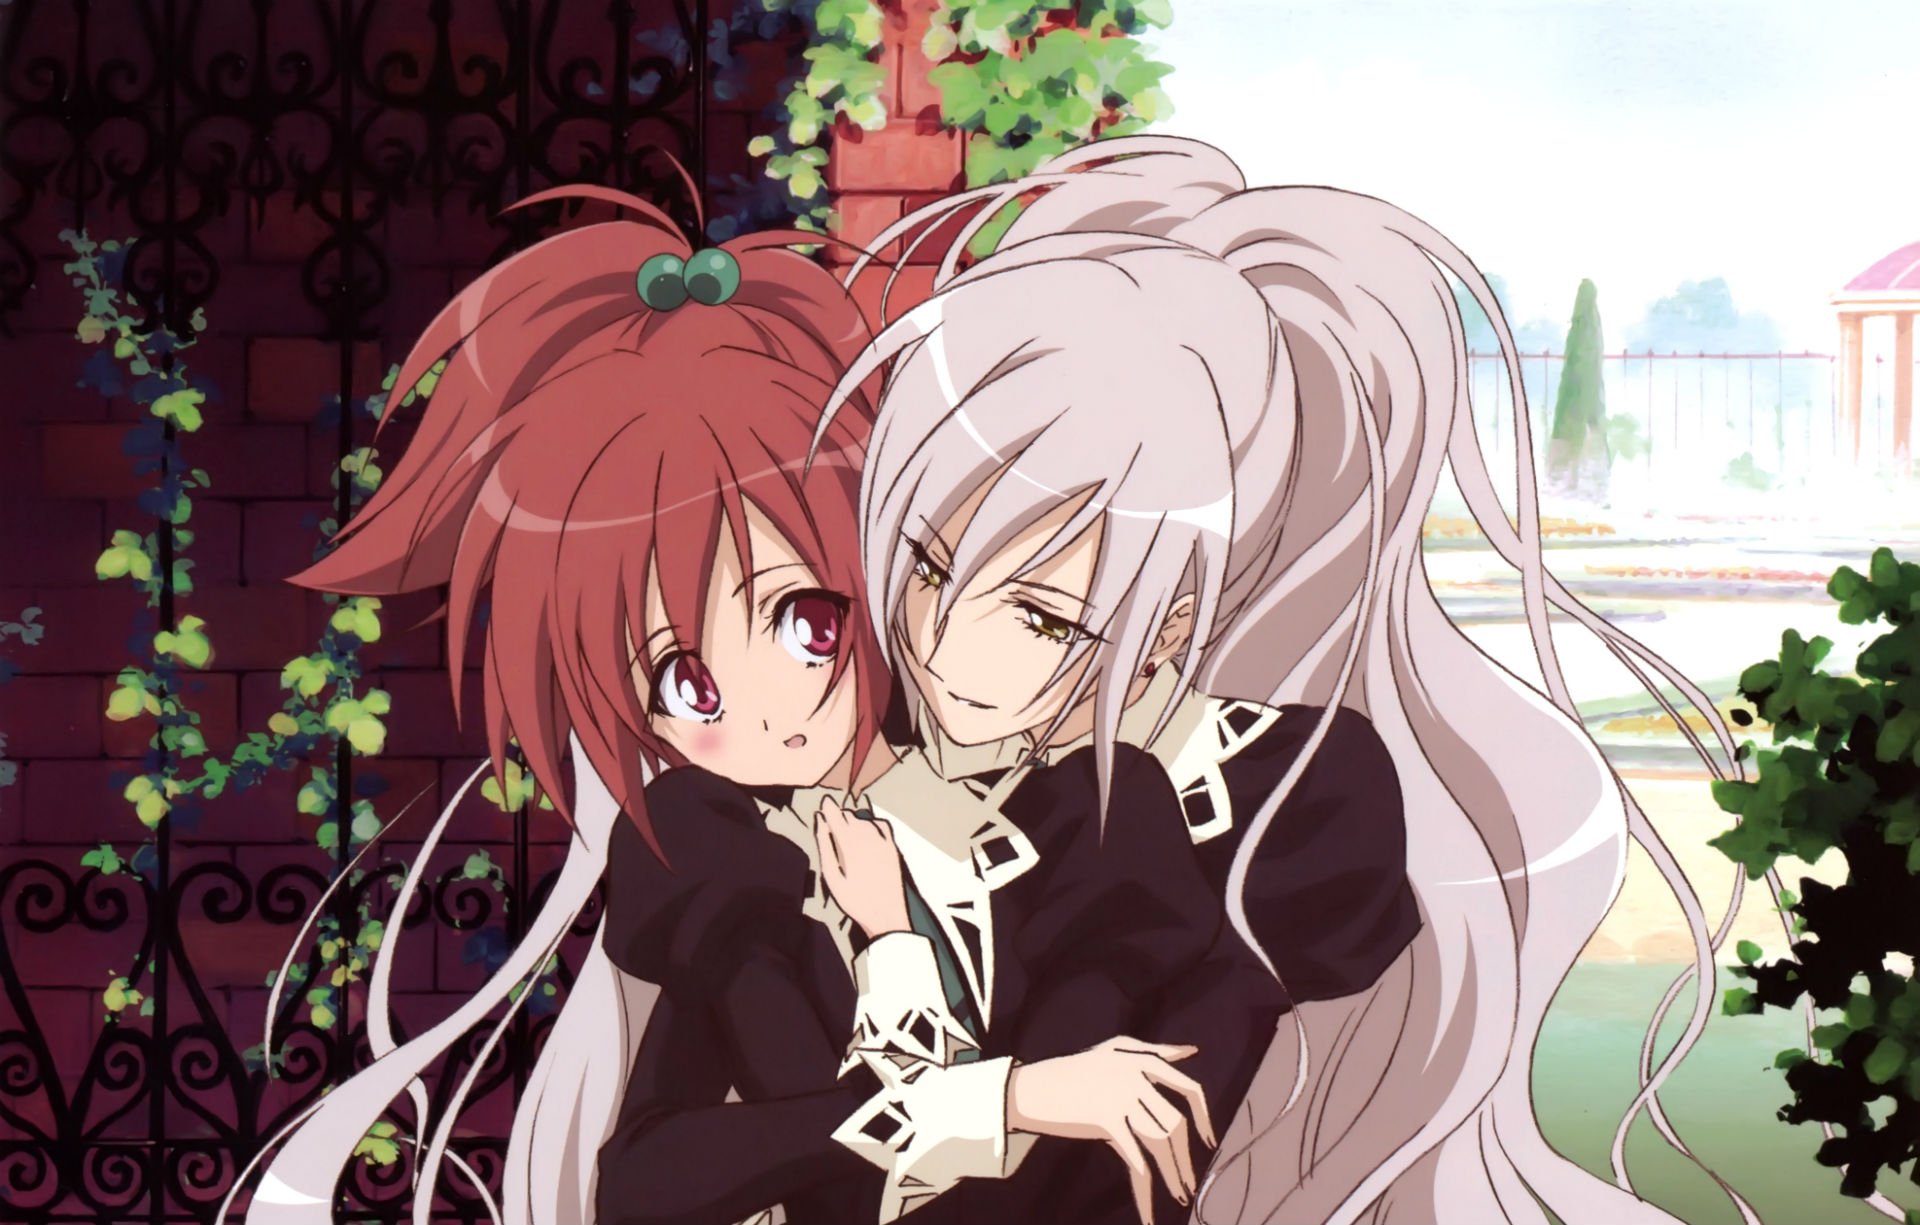 Strawberry Panic complete series / NEW Yuri anime on DVD from Anime Works |  eBay